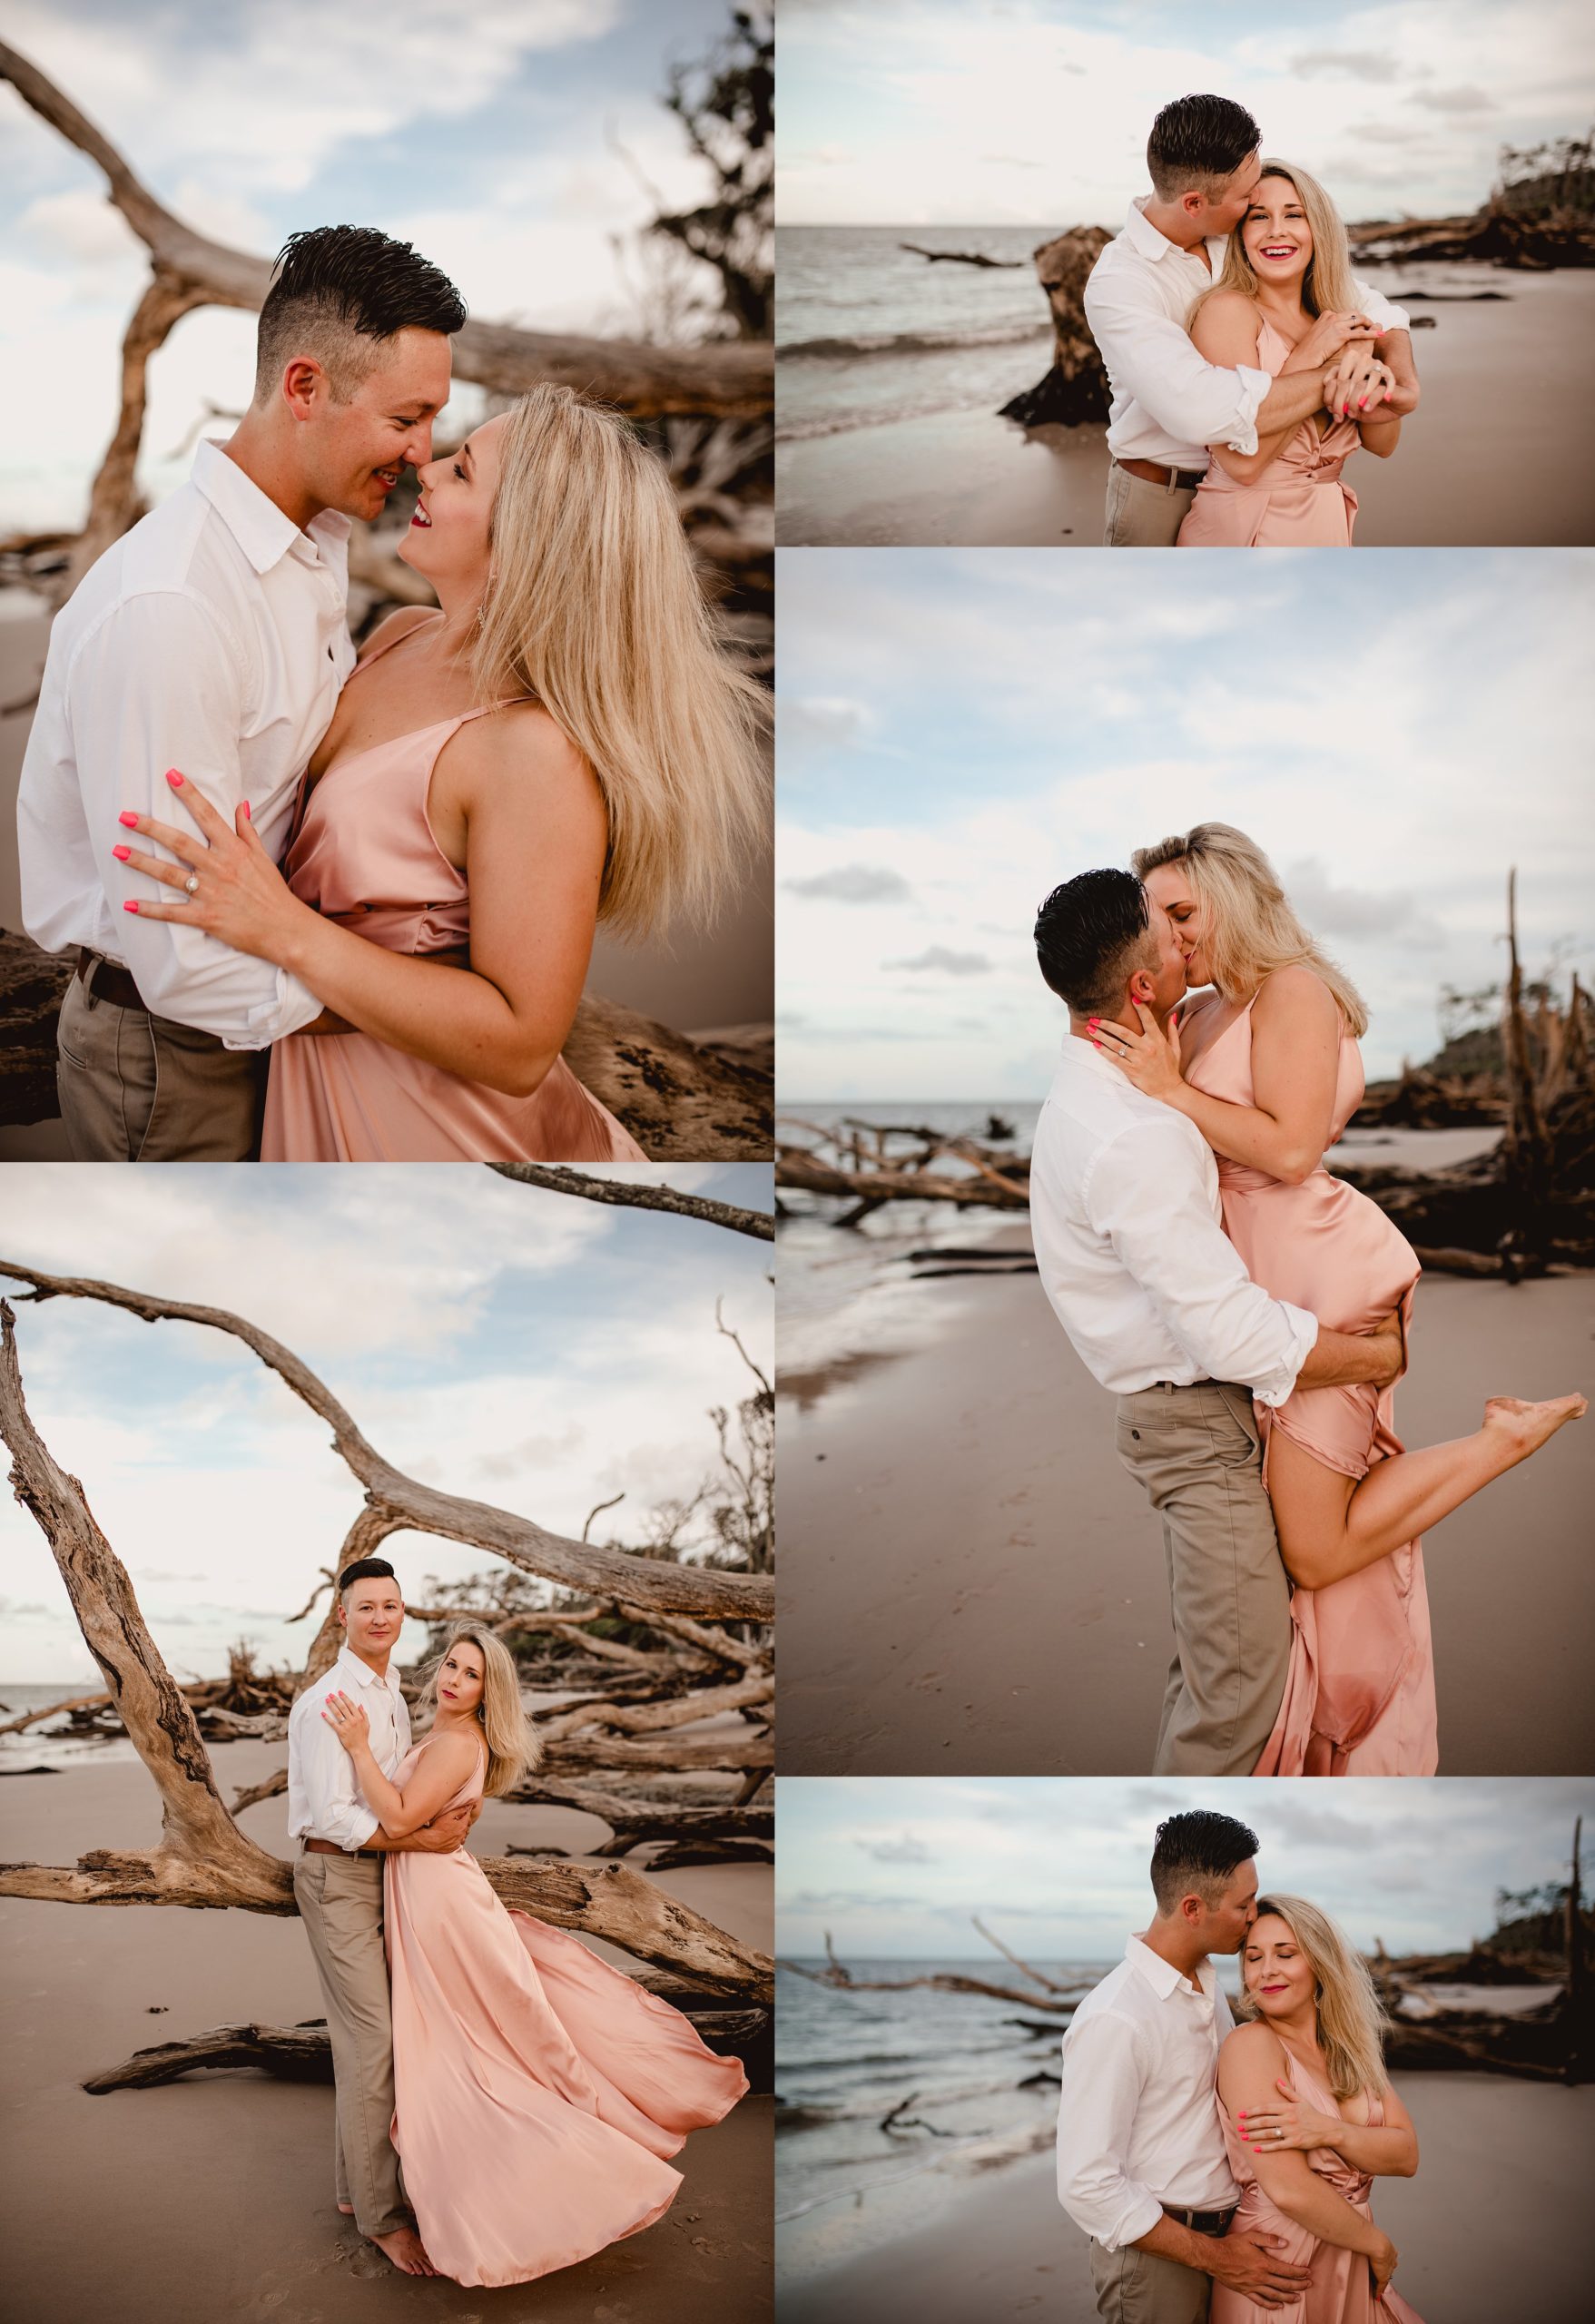 Engagement photographer in north florida takes sexy pictures on the beach.